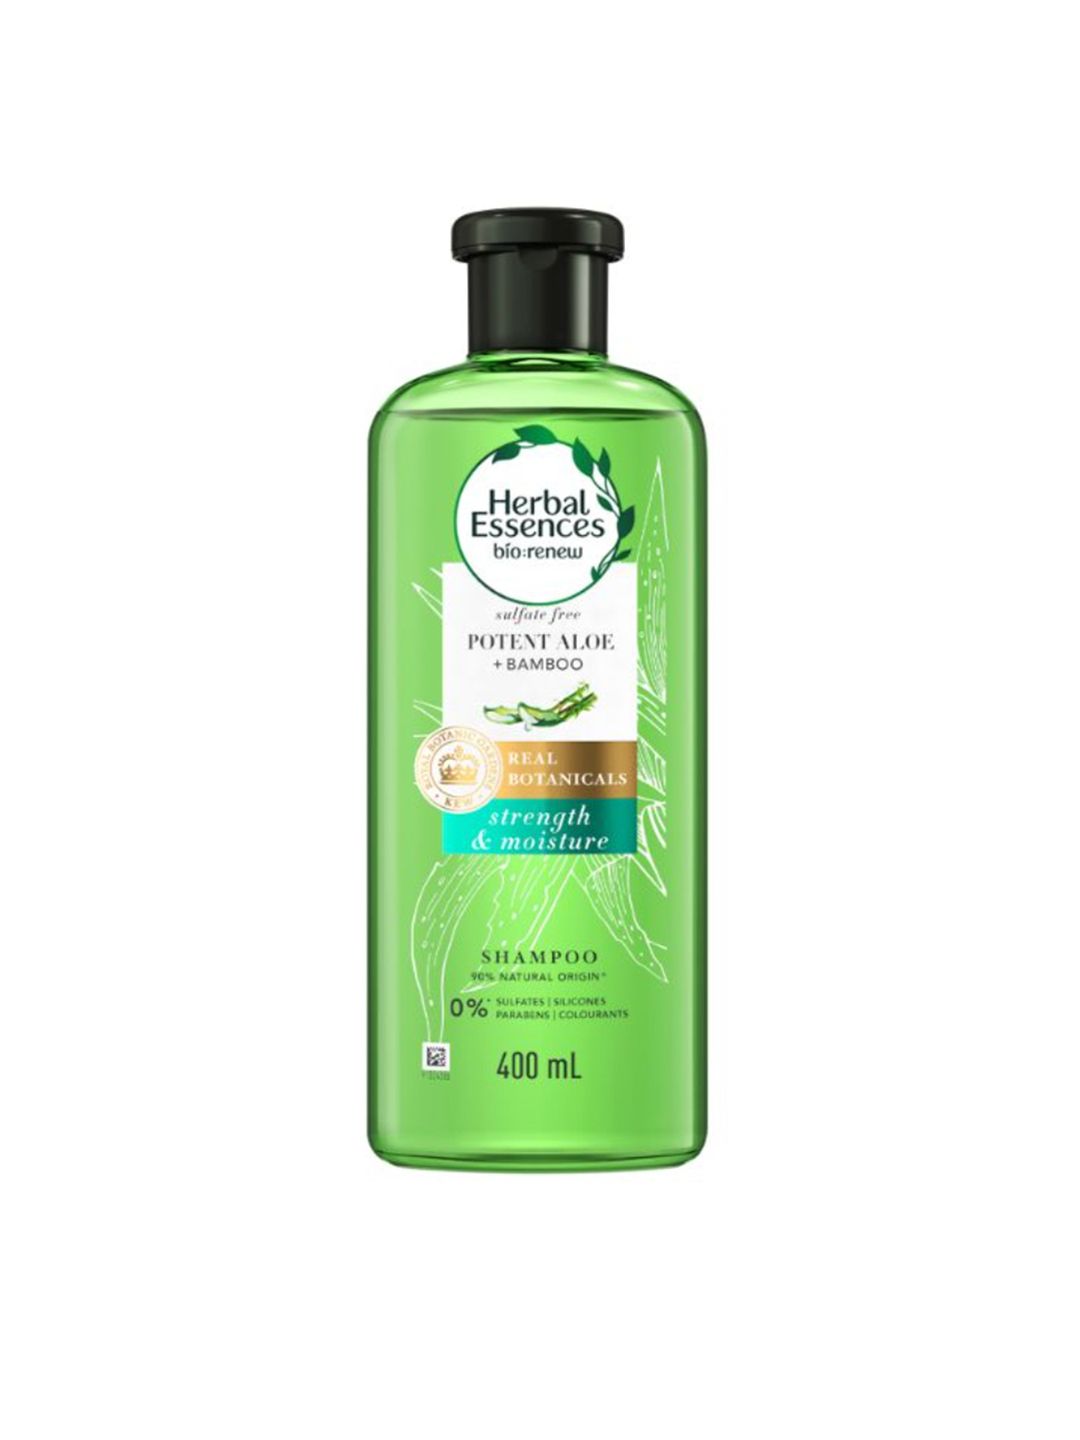 Herbal Essences Real Botanicals Potent Aloe & Bamboo Shampoo 400 ML Price in India